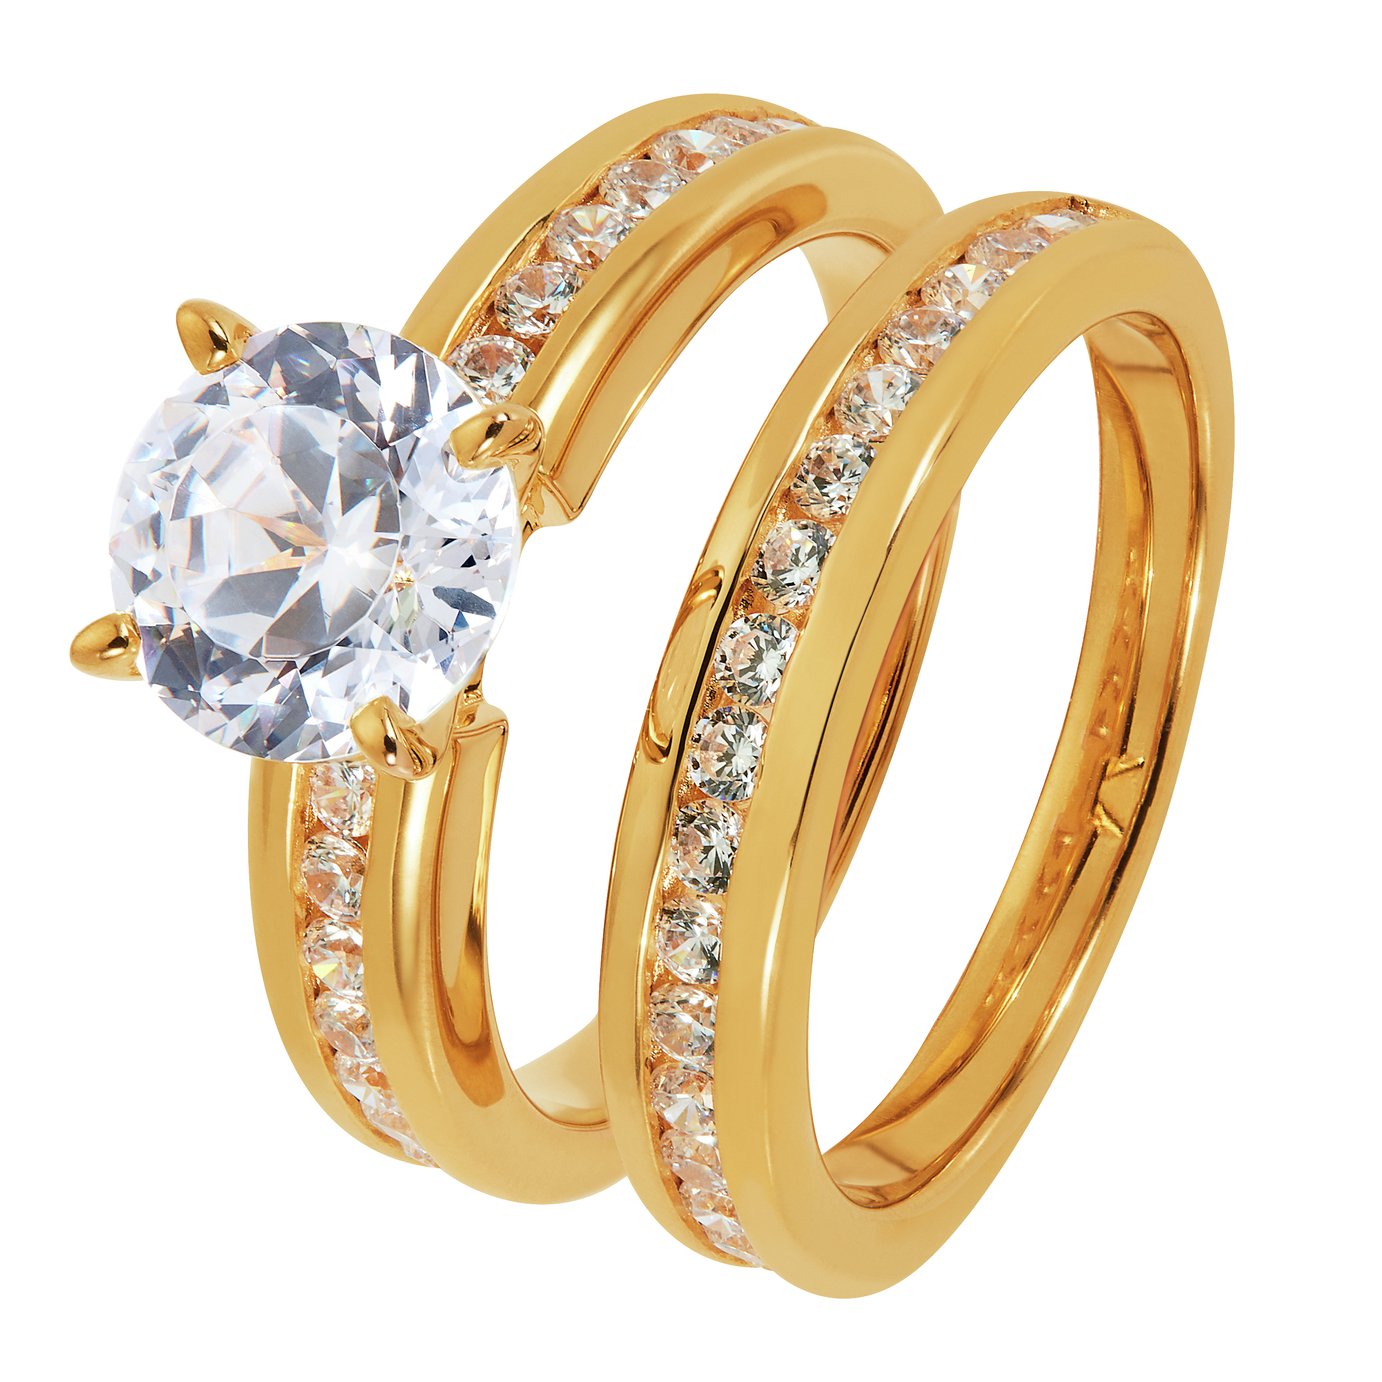 Revere 9ct Gold Plated Cubic Zirconia Bridal Ring Set - T